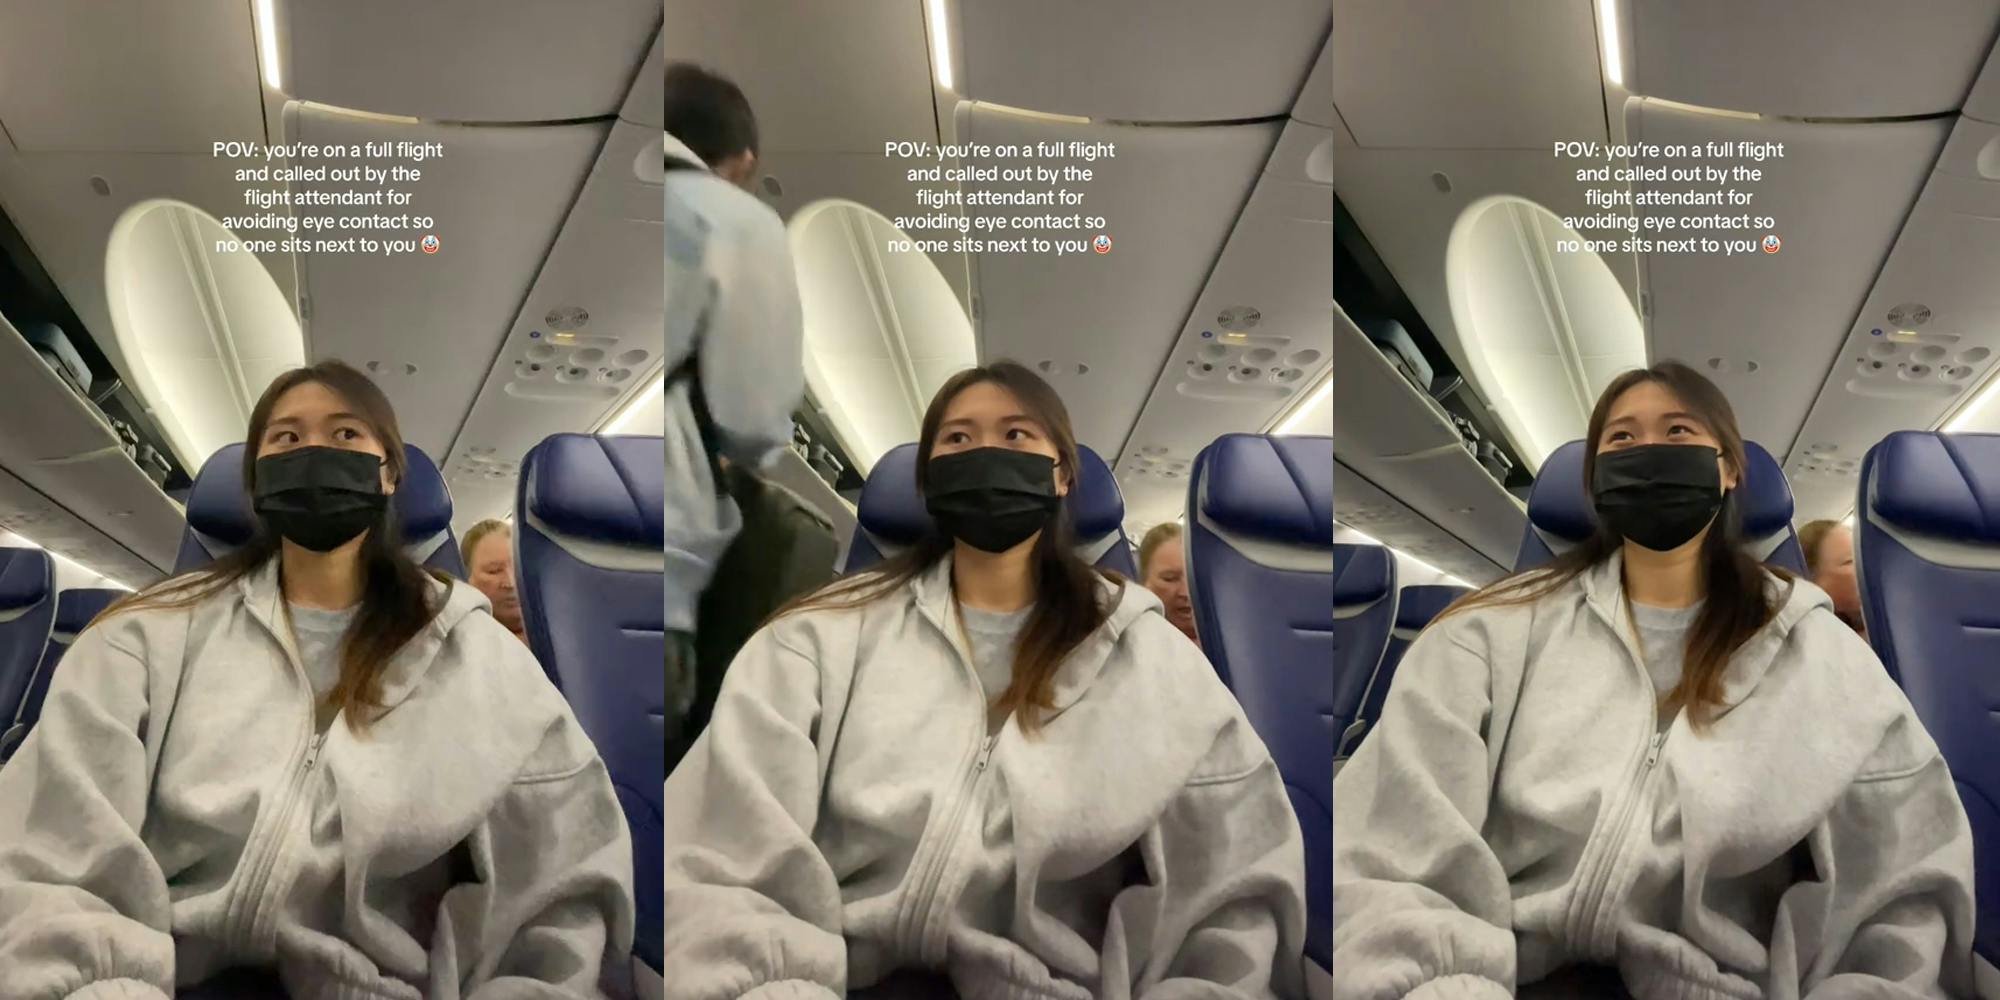 'PLEASE ID CRYYYY': Southwest flight attendant calls out passenger for avoiding eye contact with others looking for seats